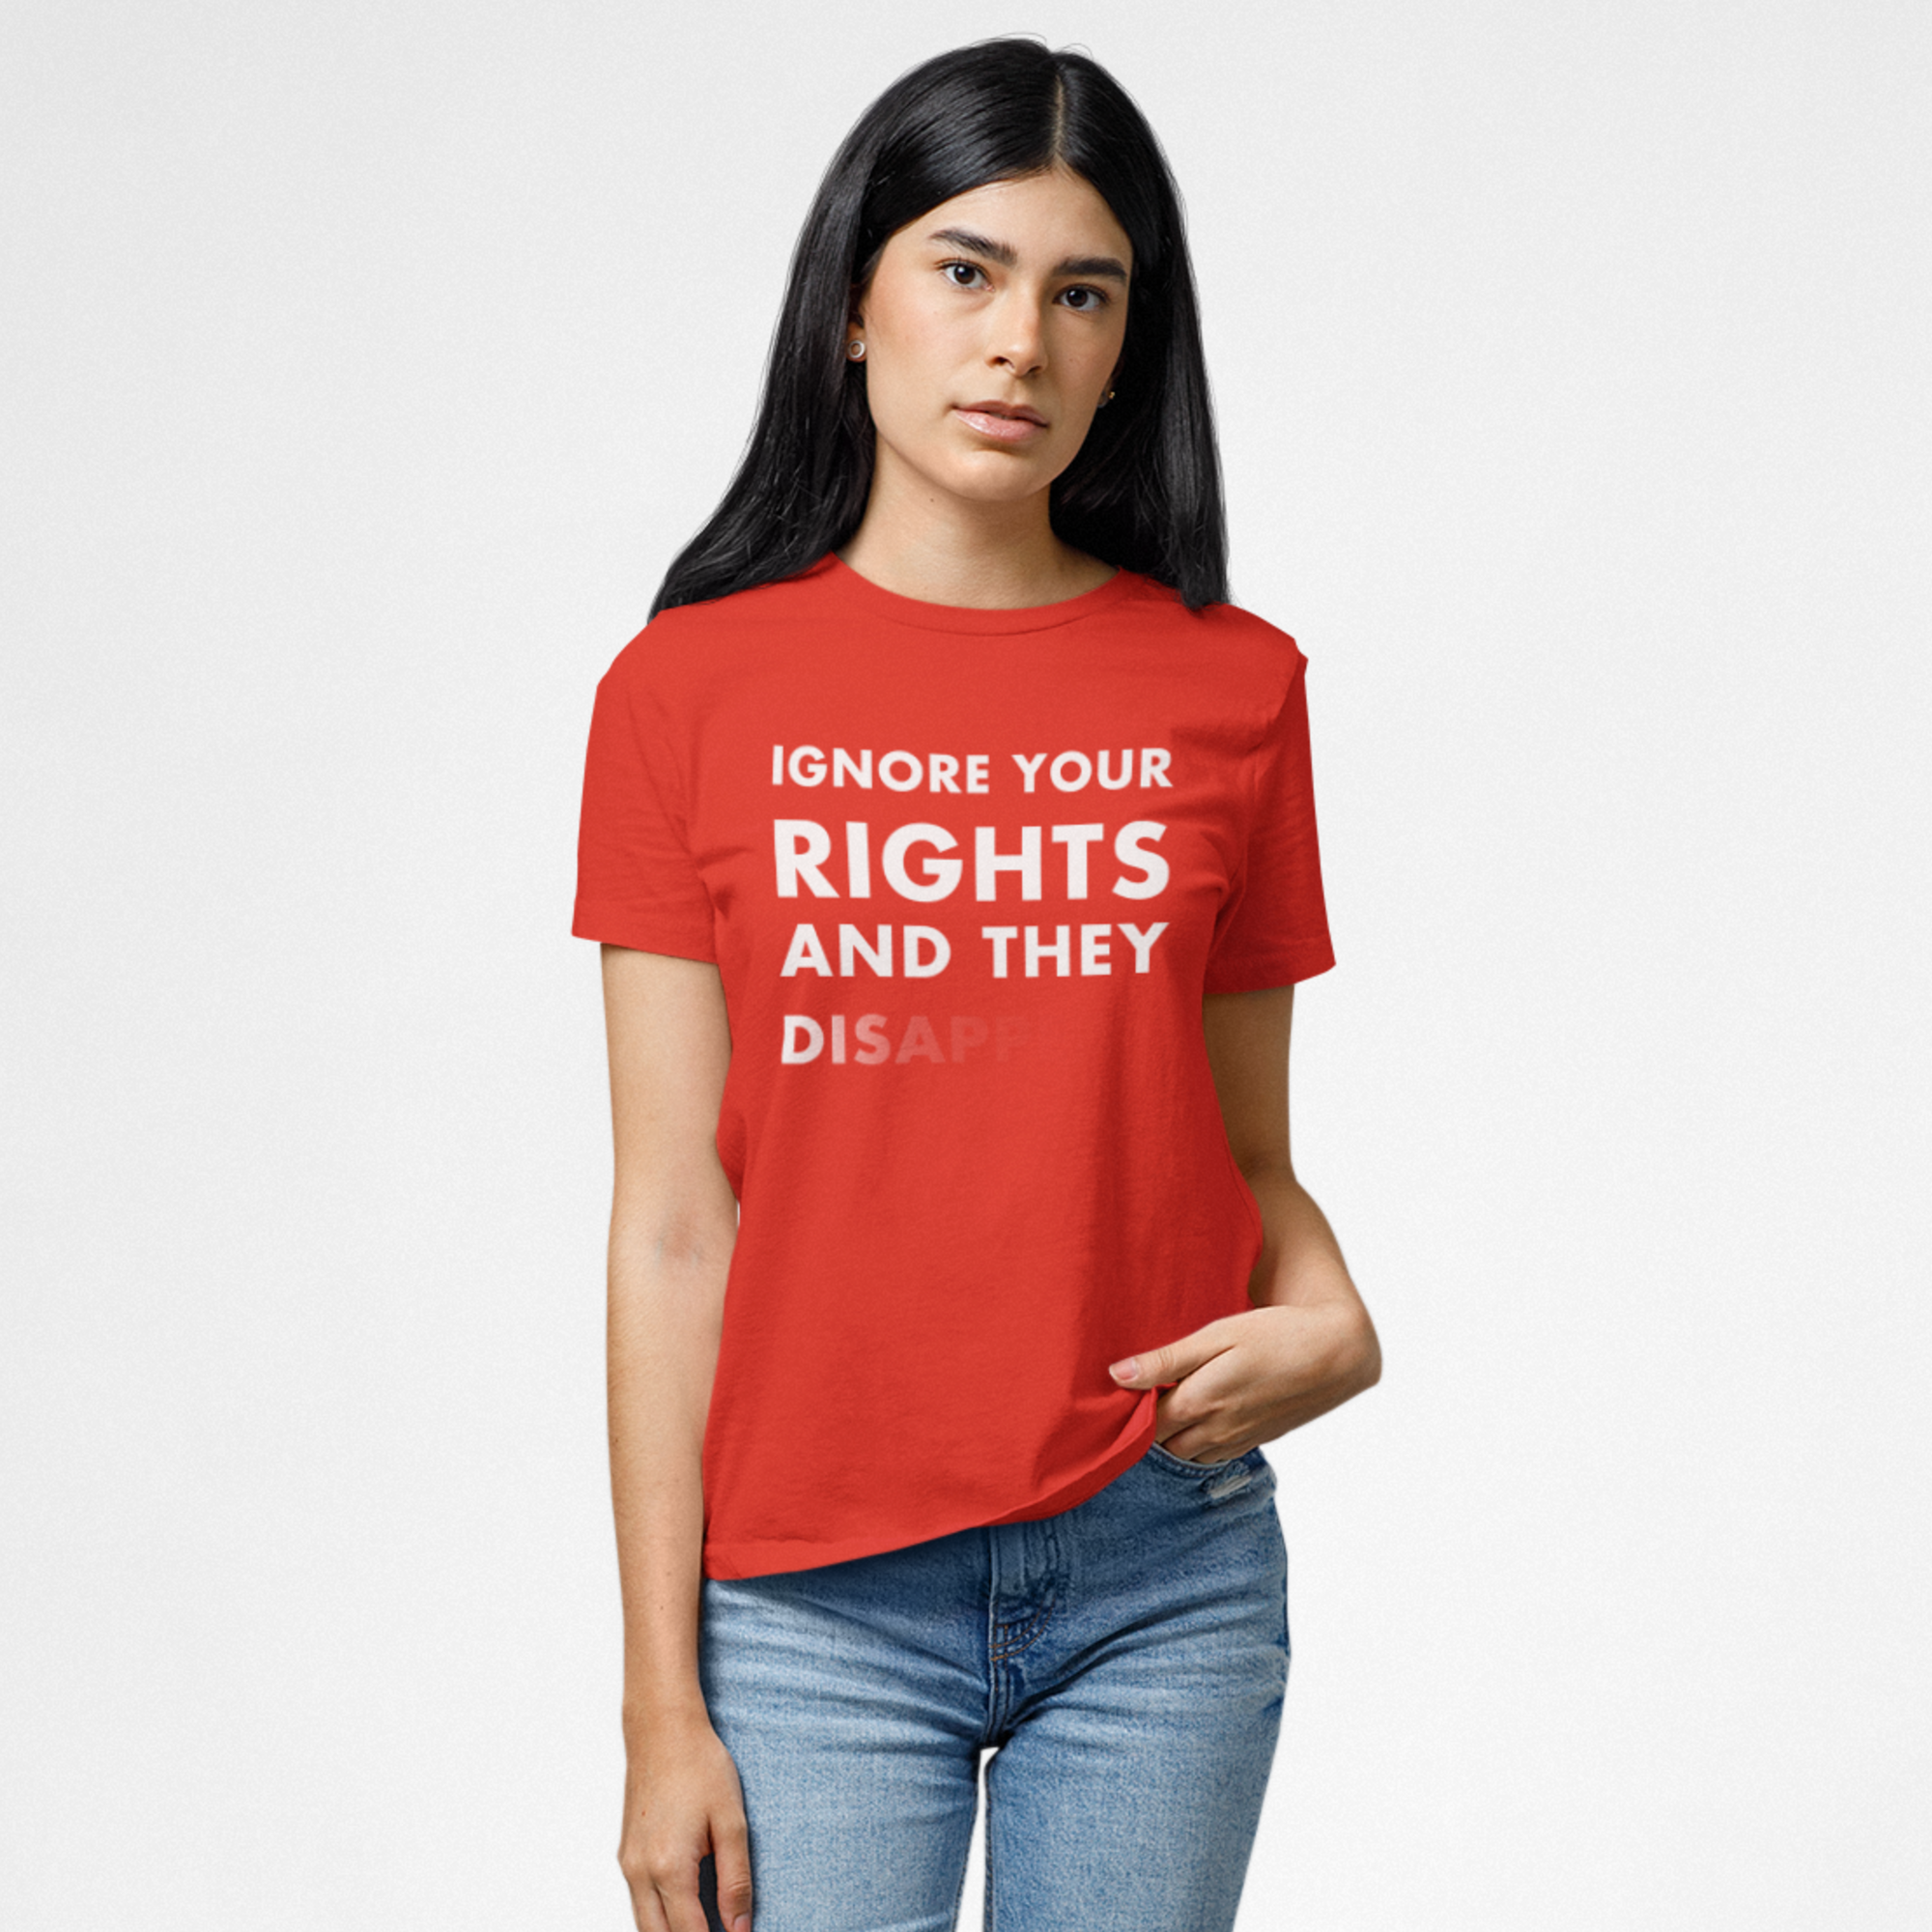 Ignore Your Rights and they Disappear Short Sleeve Women's T-shirt